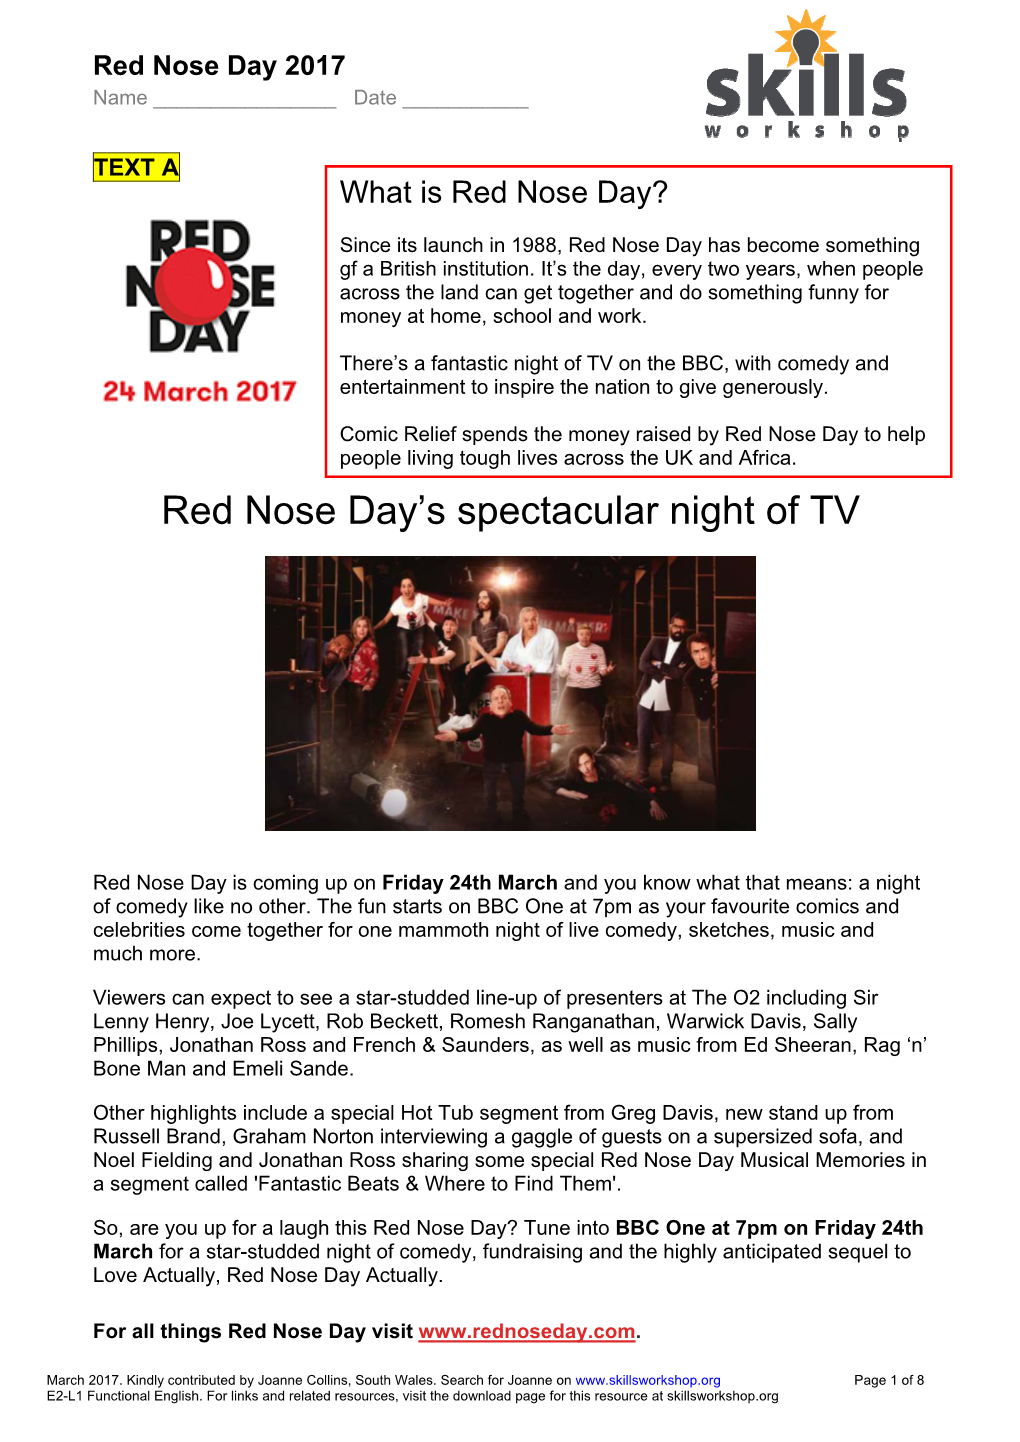 E2-L1 Red Nose Day 2017